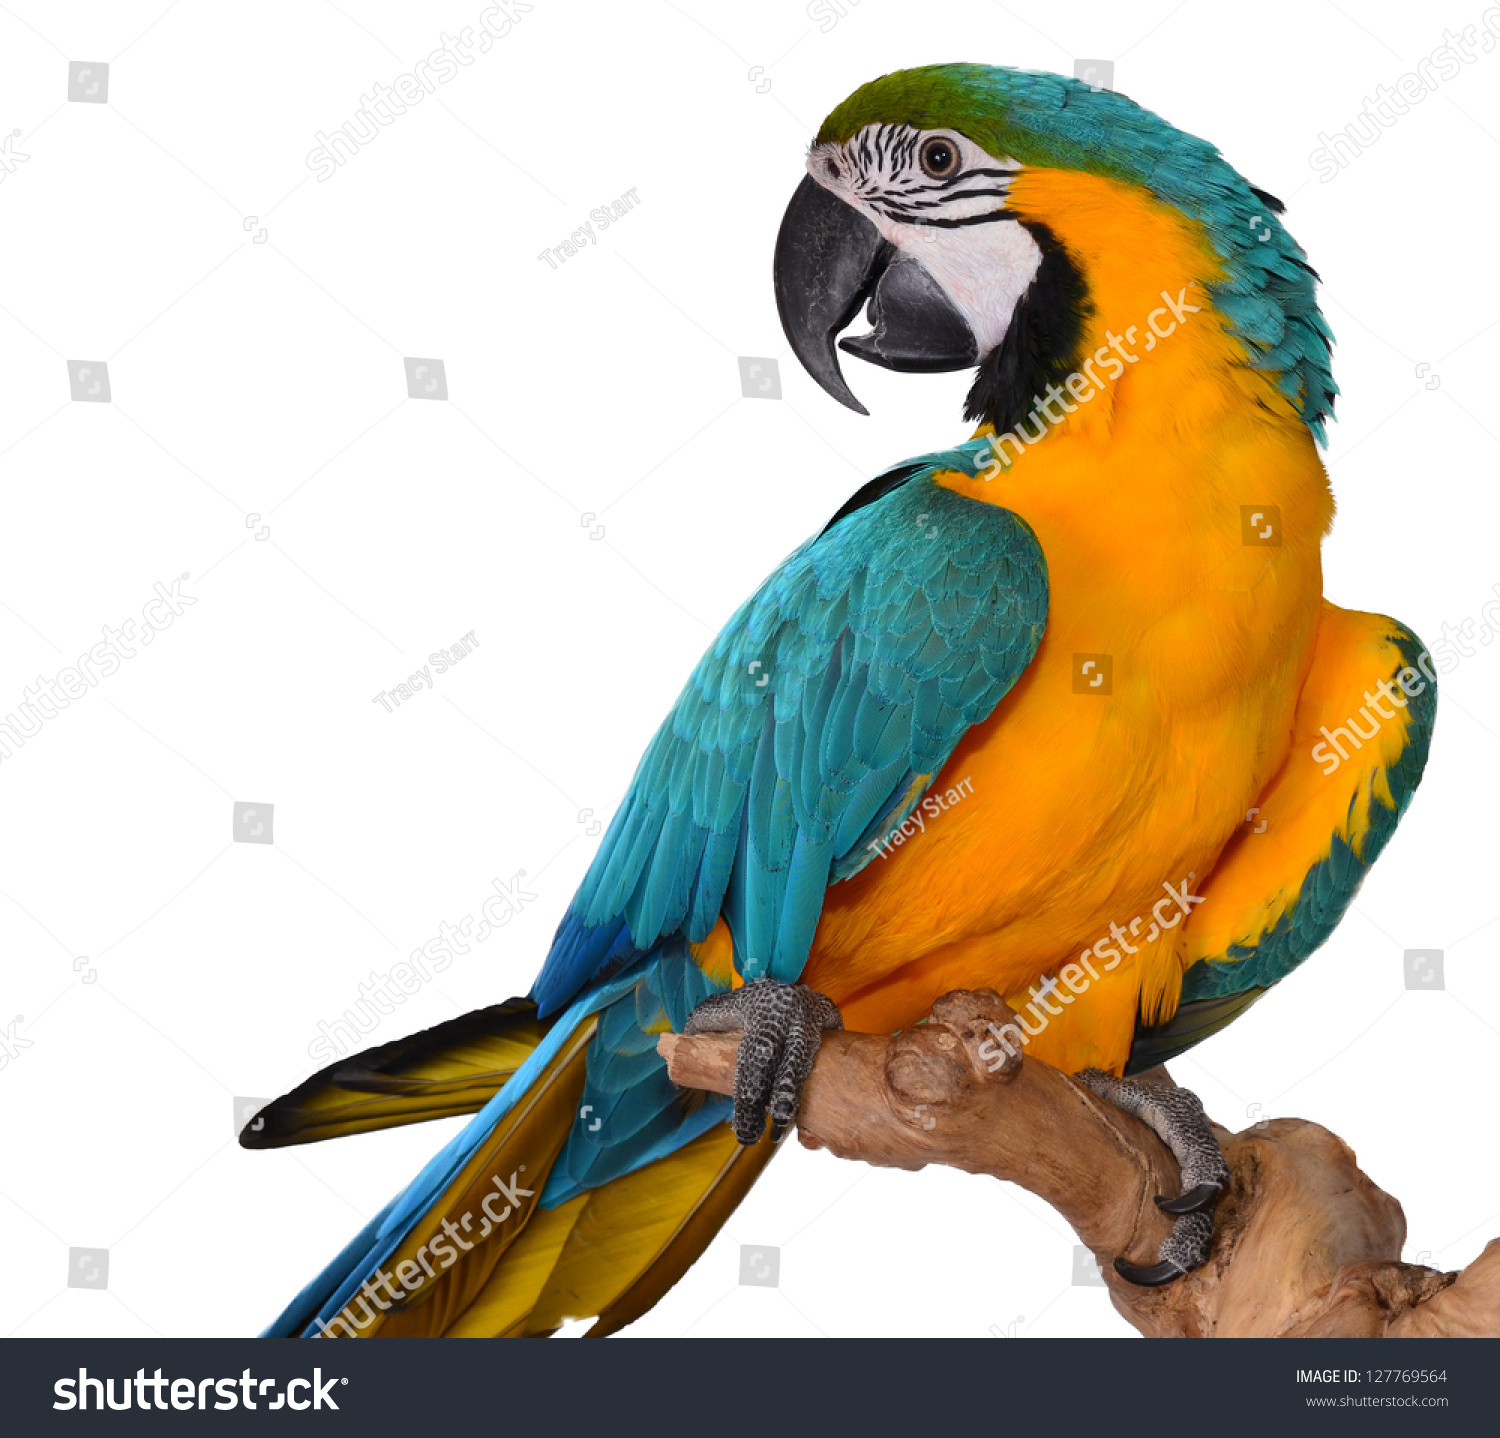 Macaw Parrot isolated on white #127769564